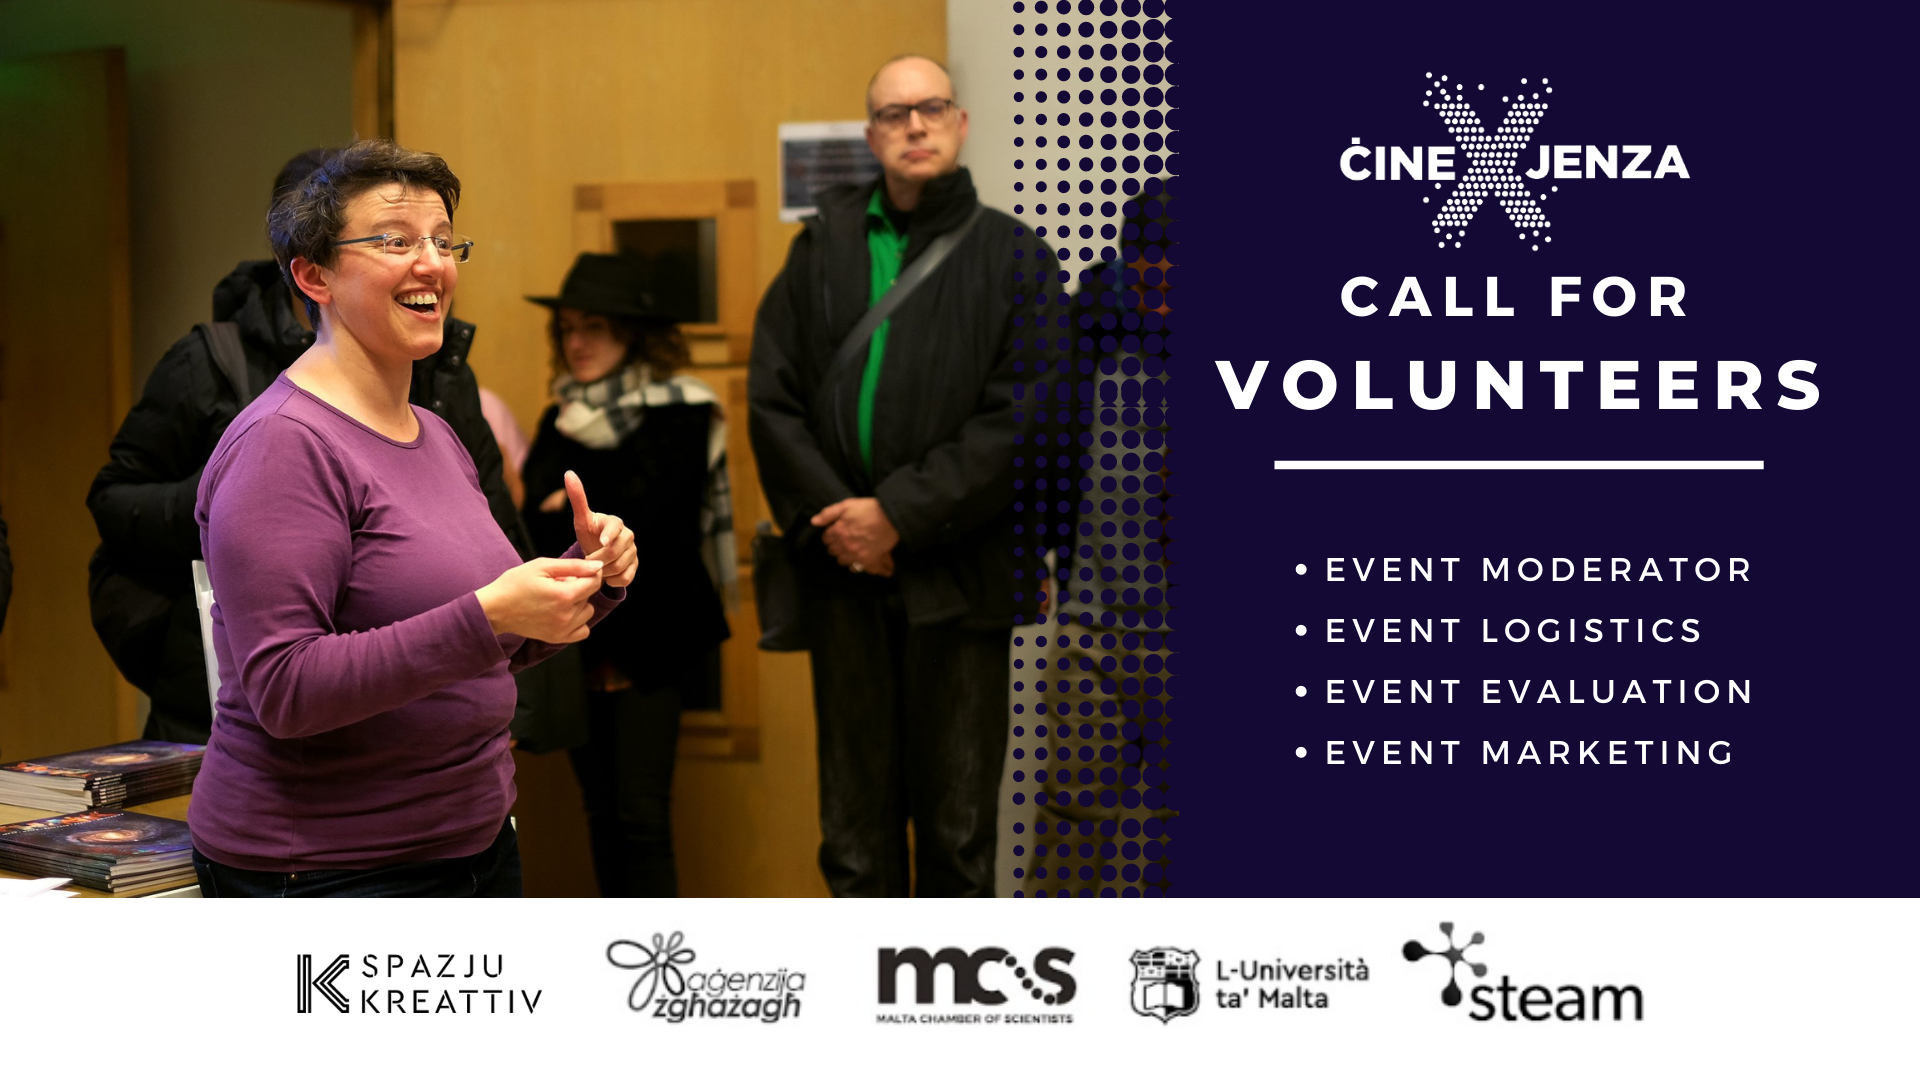 You are currently viewing ĊineXjenza Call for Volunteers